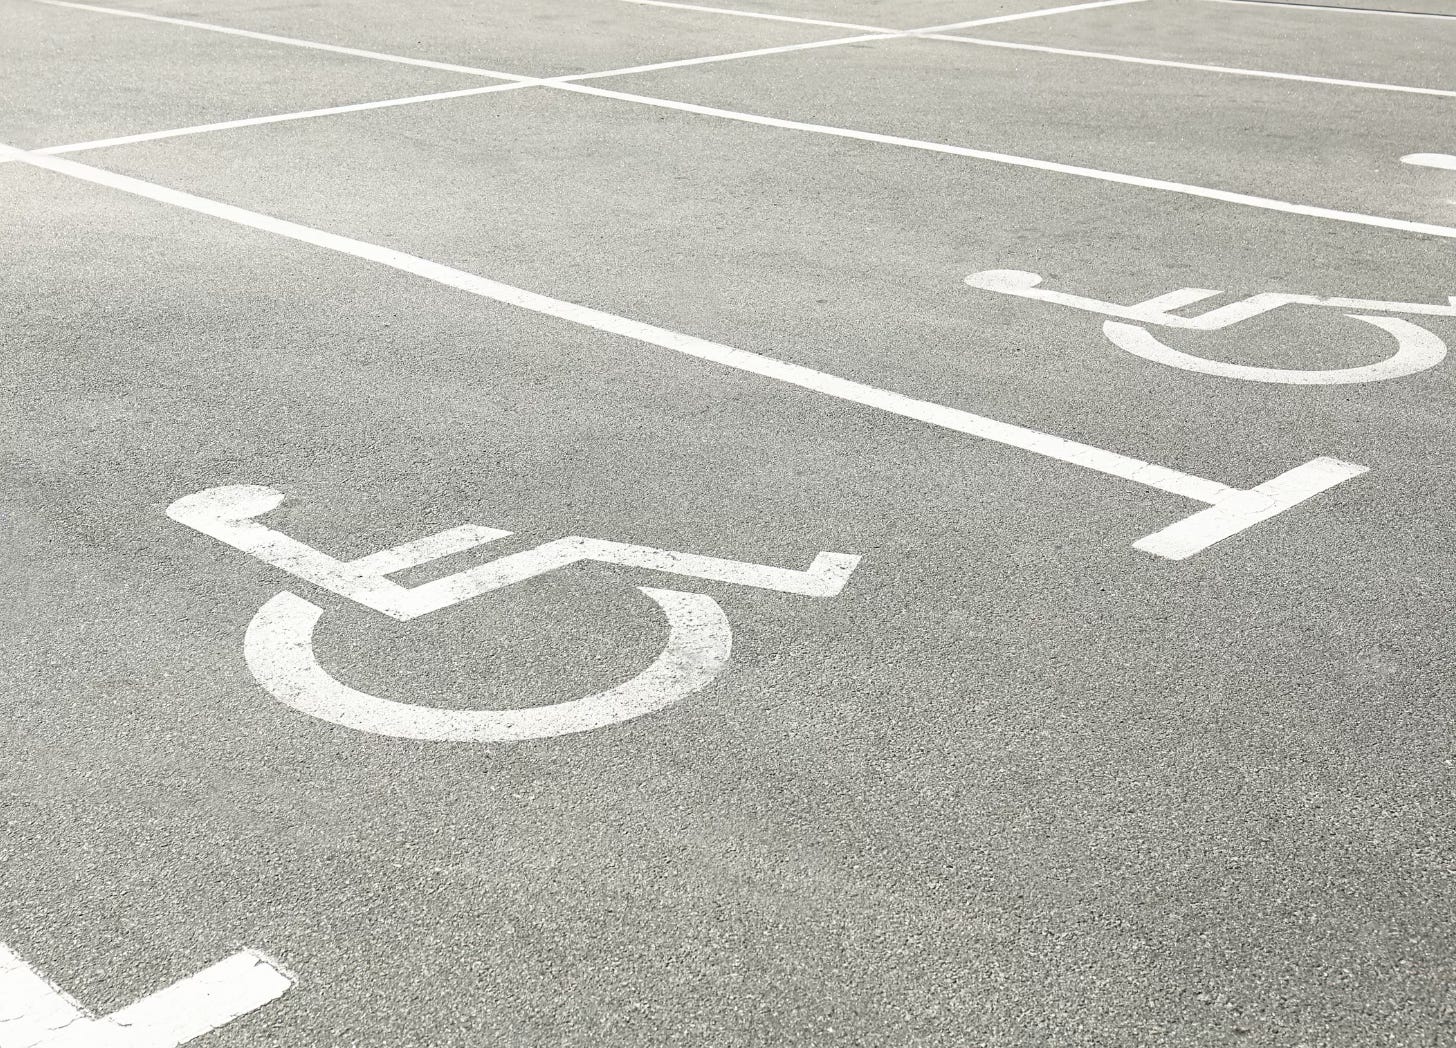 Accessible parking spaces marked on pavement with wheelchair symbols